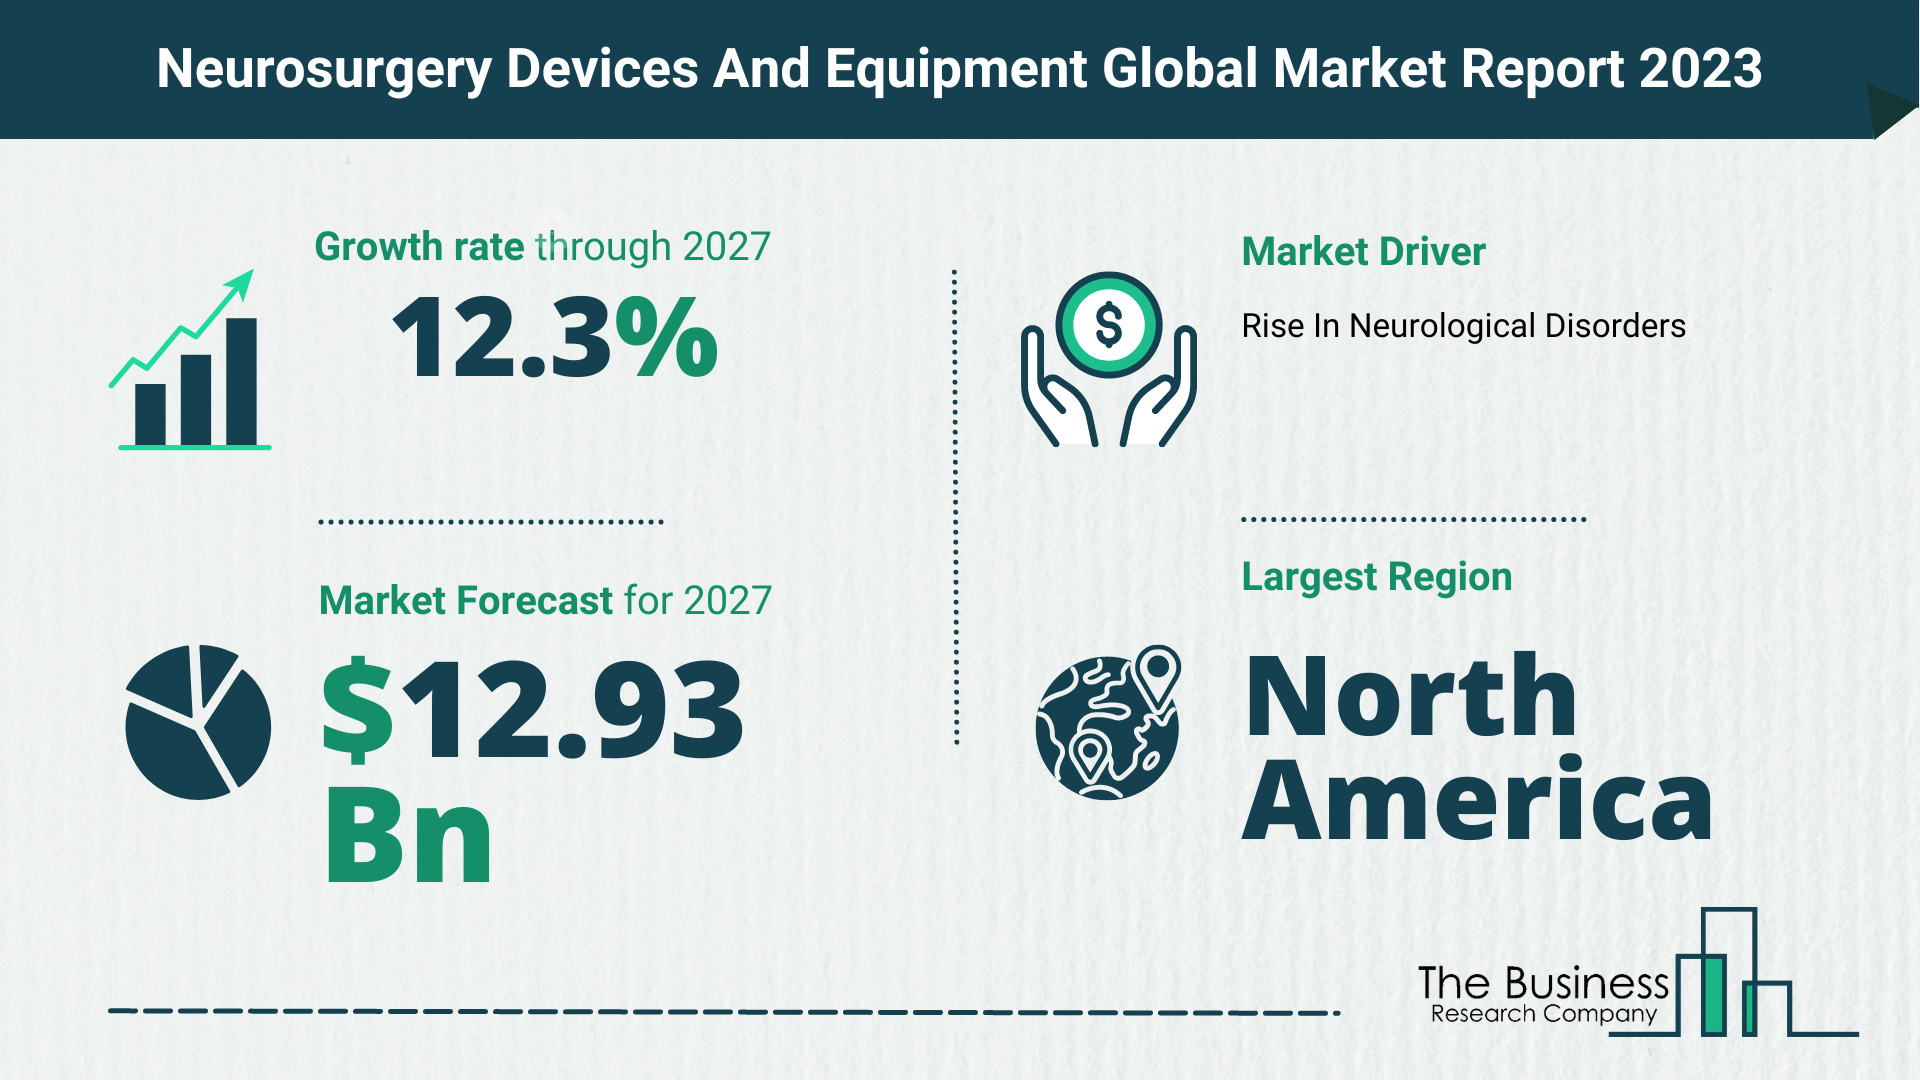 Global Neurosurgery Devices And Equipment Market Size